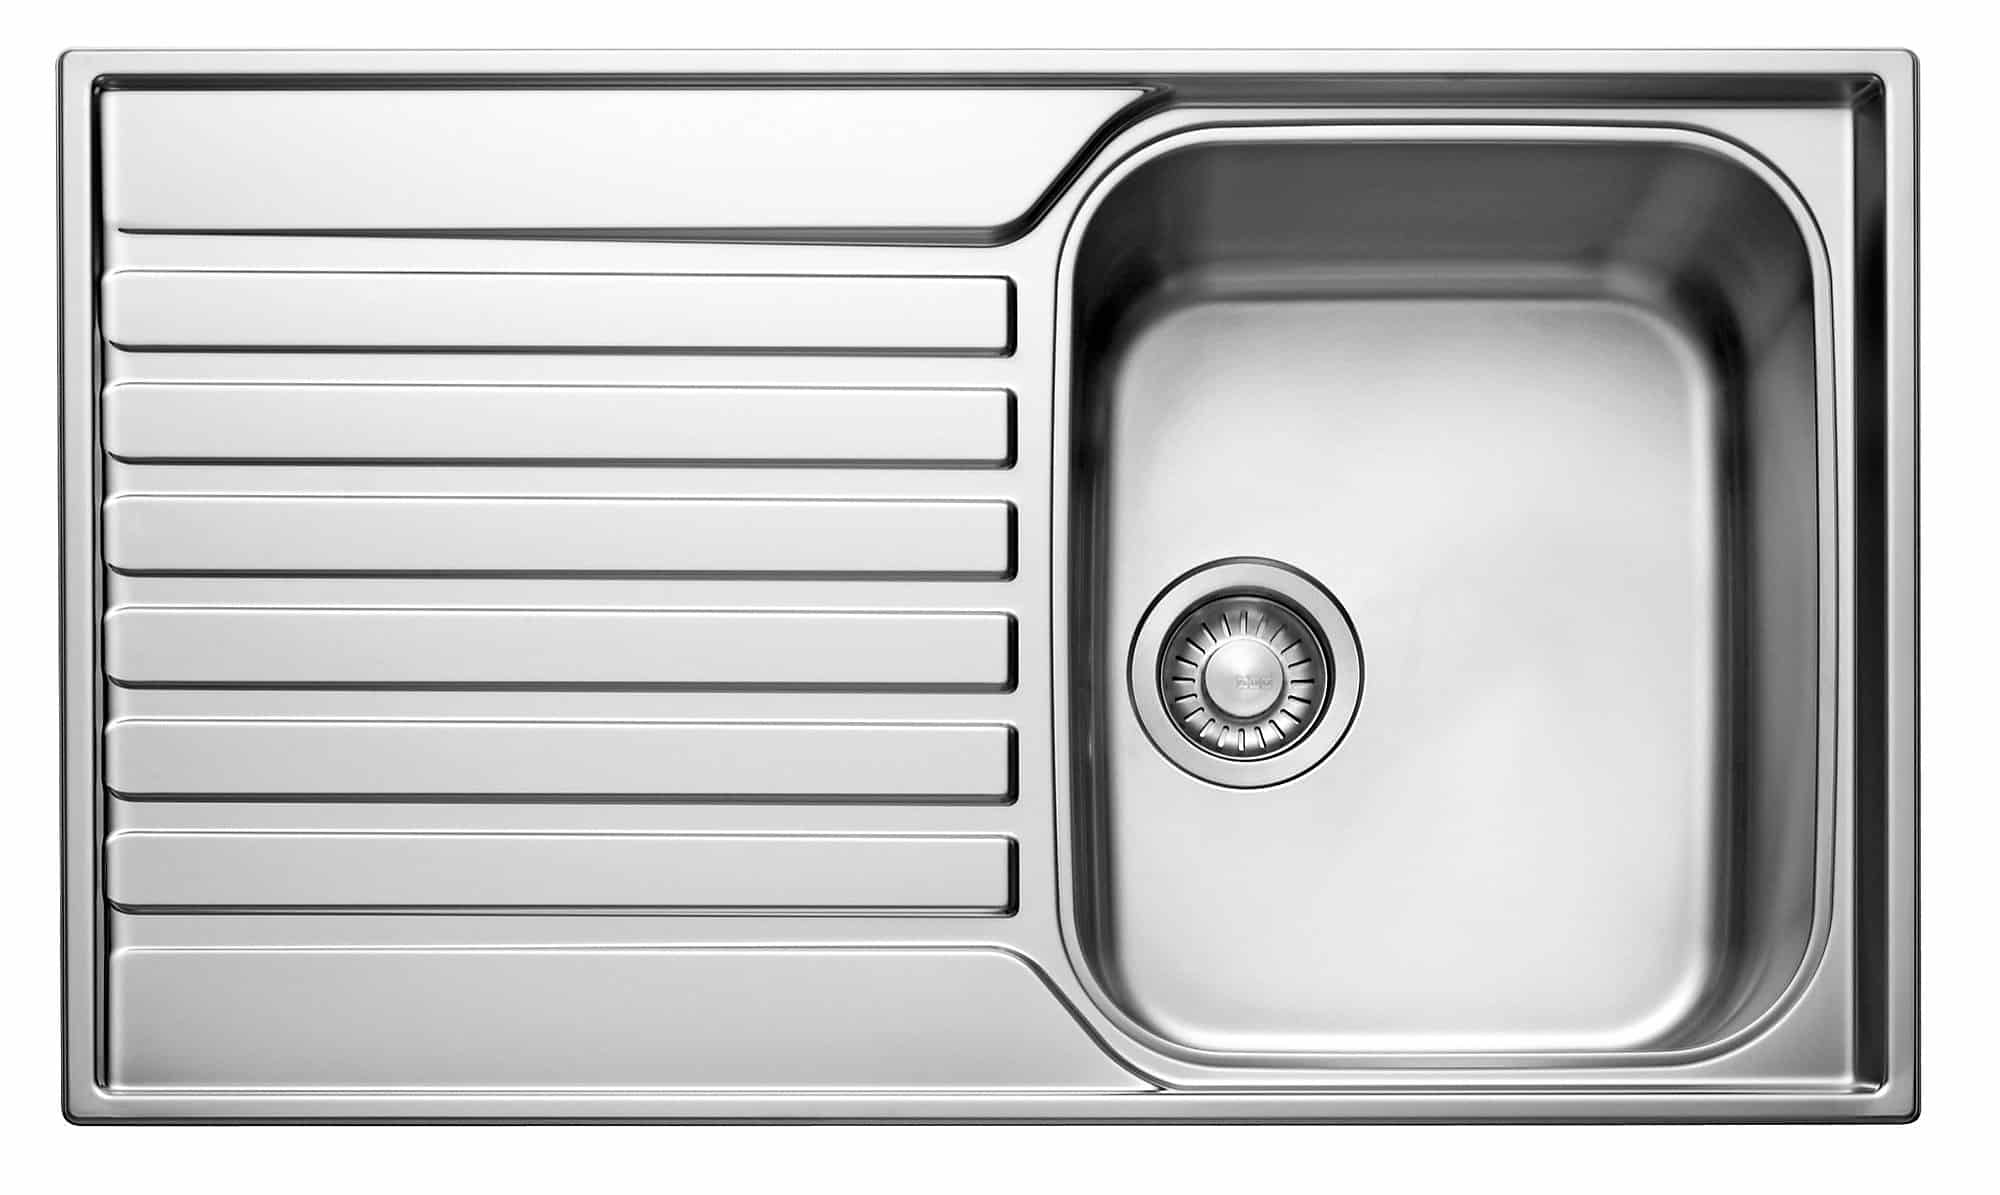 Franke Ascona Stainless steel 1 Bowl Sink & drainer (W)510mm x (L)860mm 1240